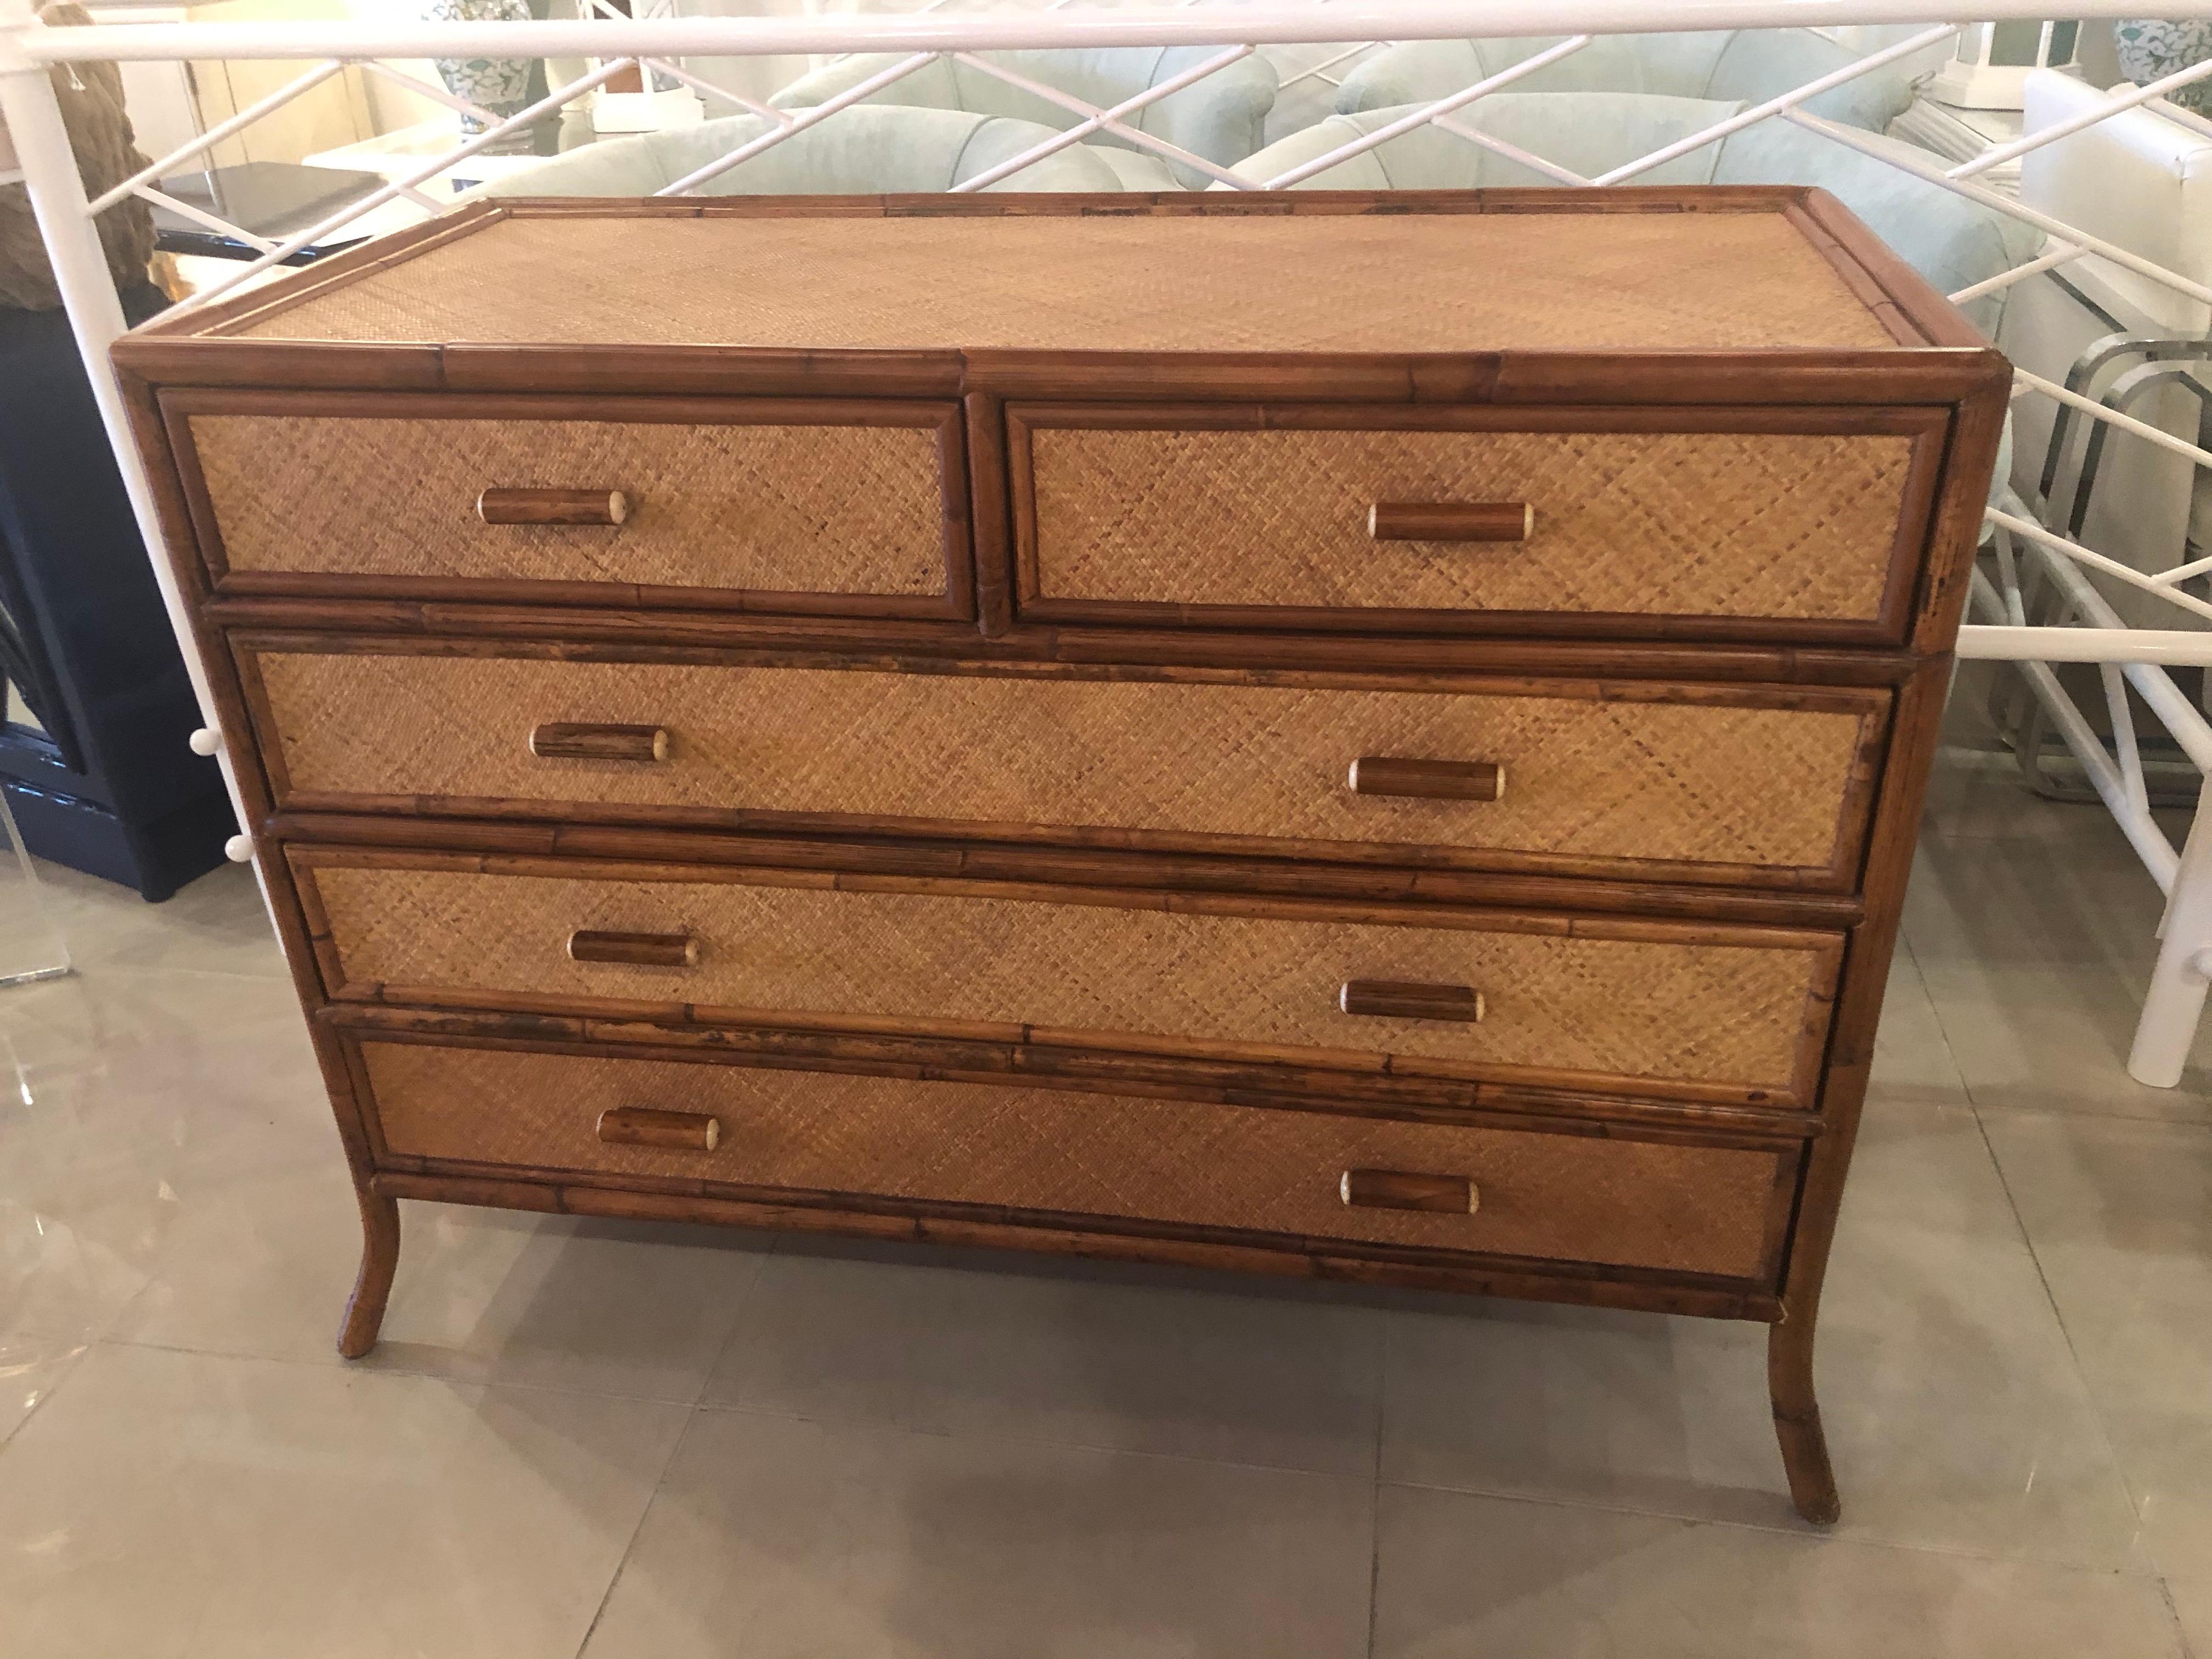 Lovely vintage grasscloth weaved cane, burnt bamboo and rattan details on this chest of drawers, credenza, dresser. There are 5 drawers, slant legs, original finish may have color variation due to natural materials.